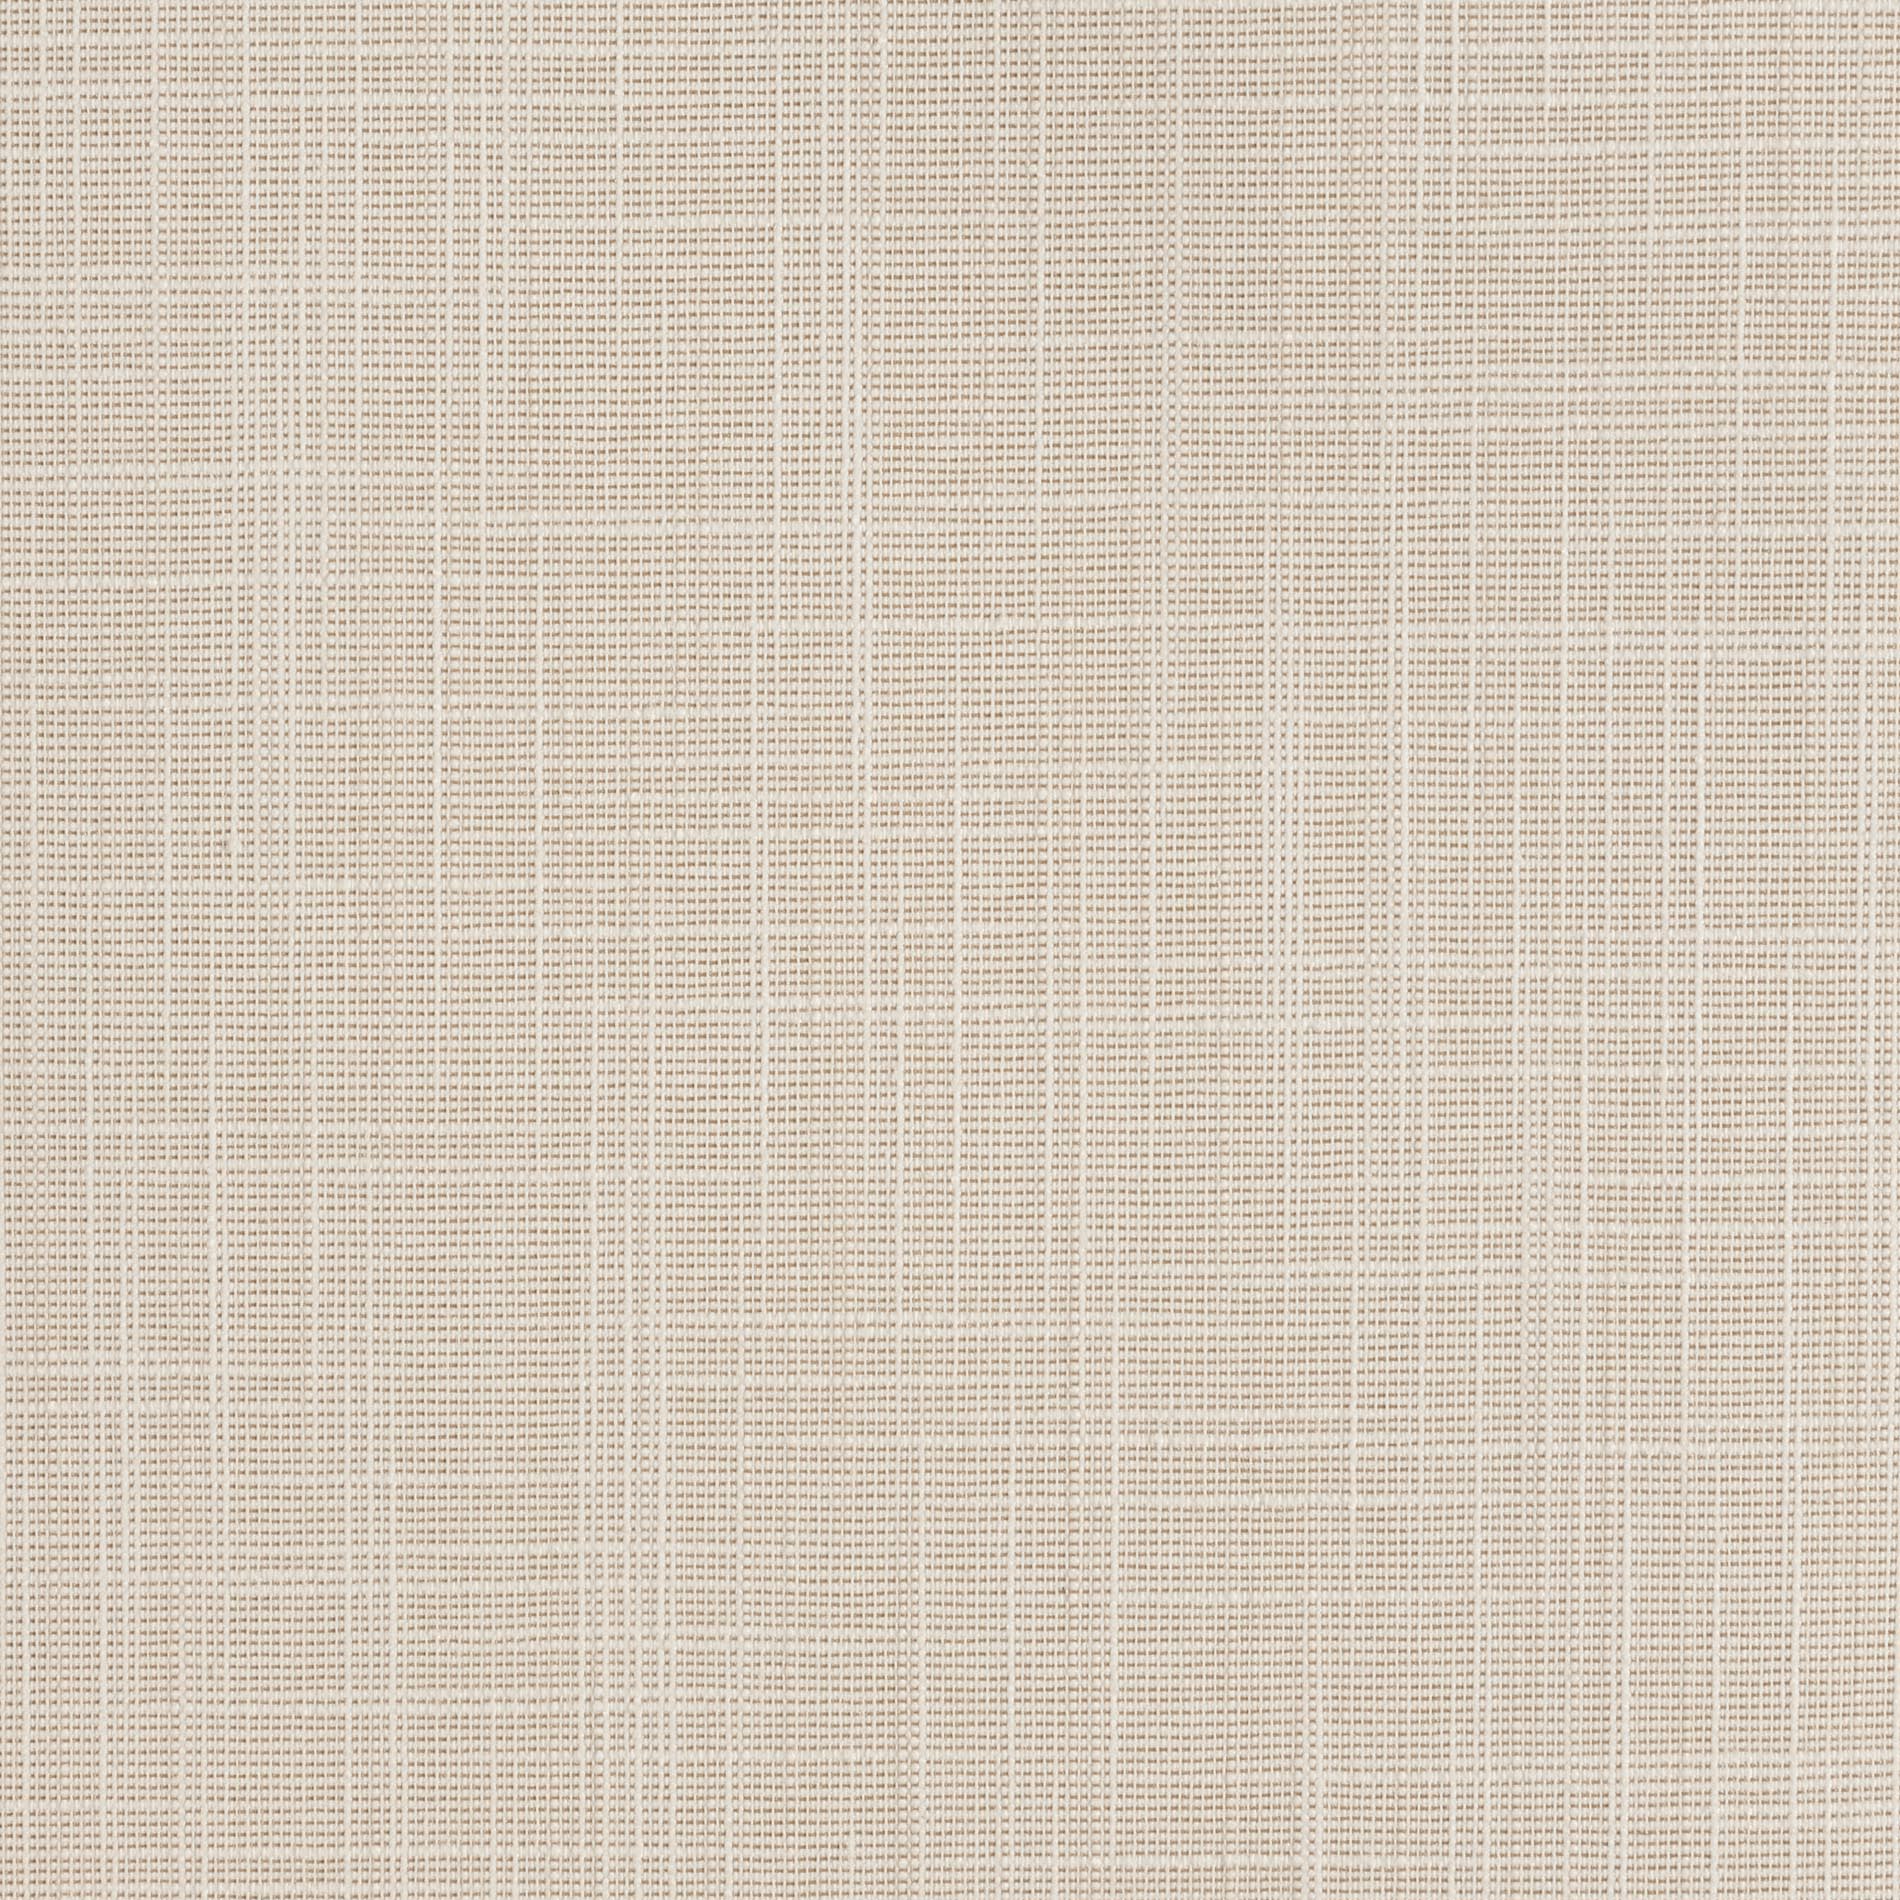 Altex - Fabric - TUSCANY II OPAQUE - Natural - 14BR33469